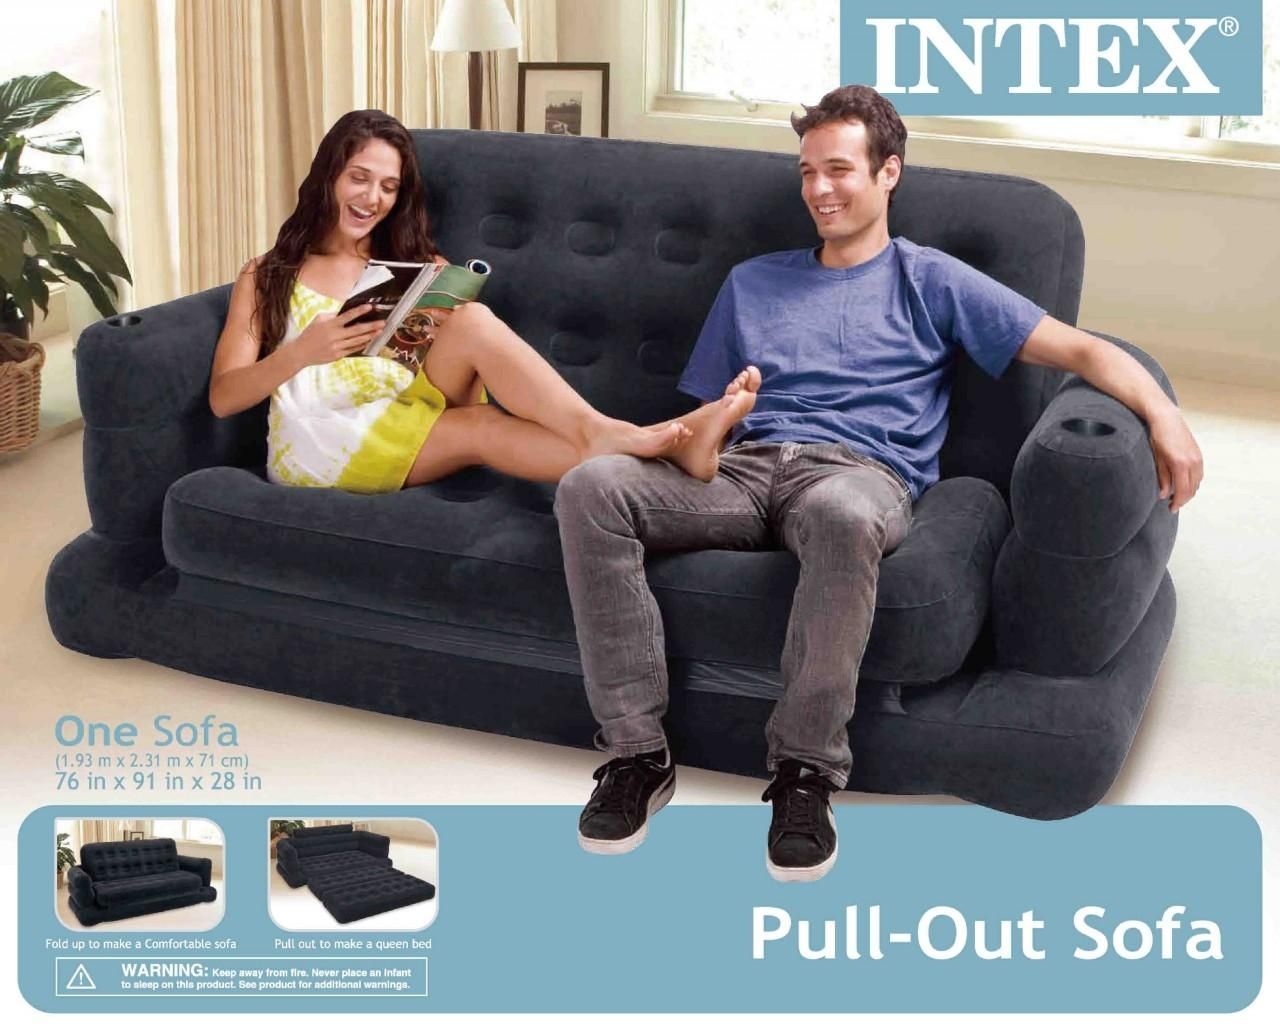 Intex Inflatable Pull Out Sofa And Queen Air Mattress For Intex Sleep Sofas (View 8 of 20)